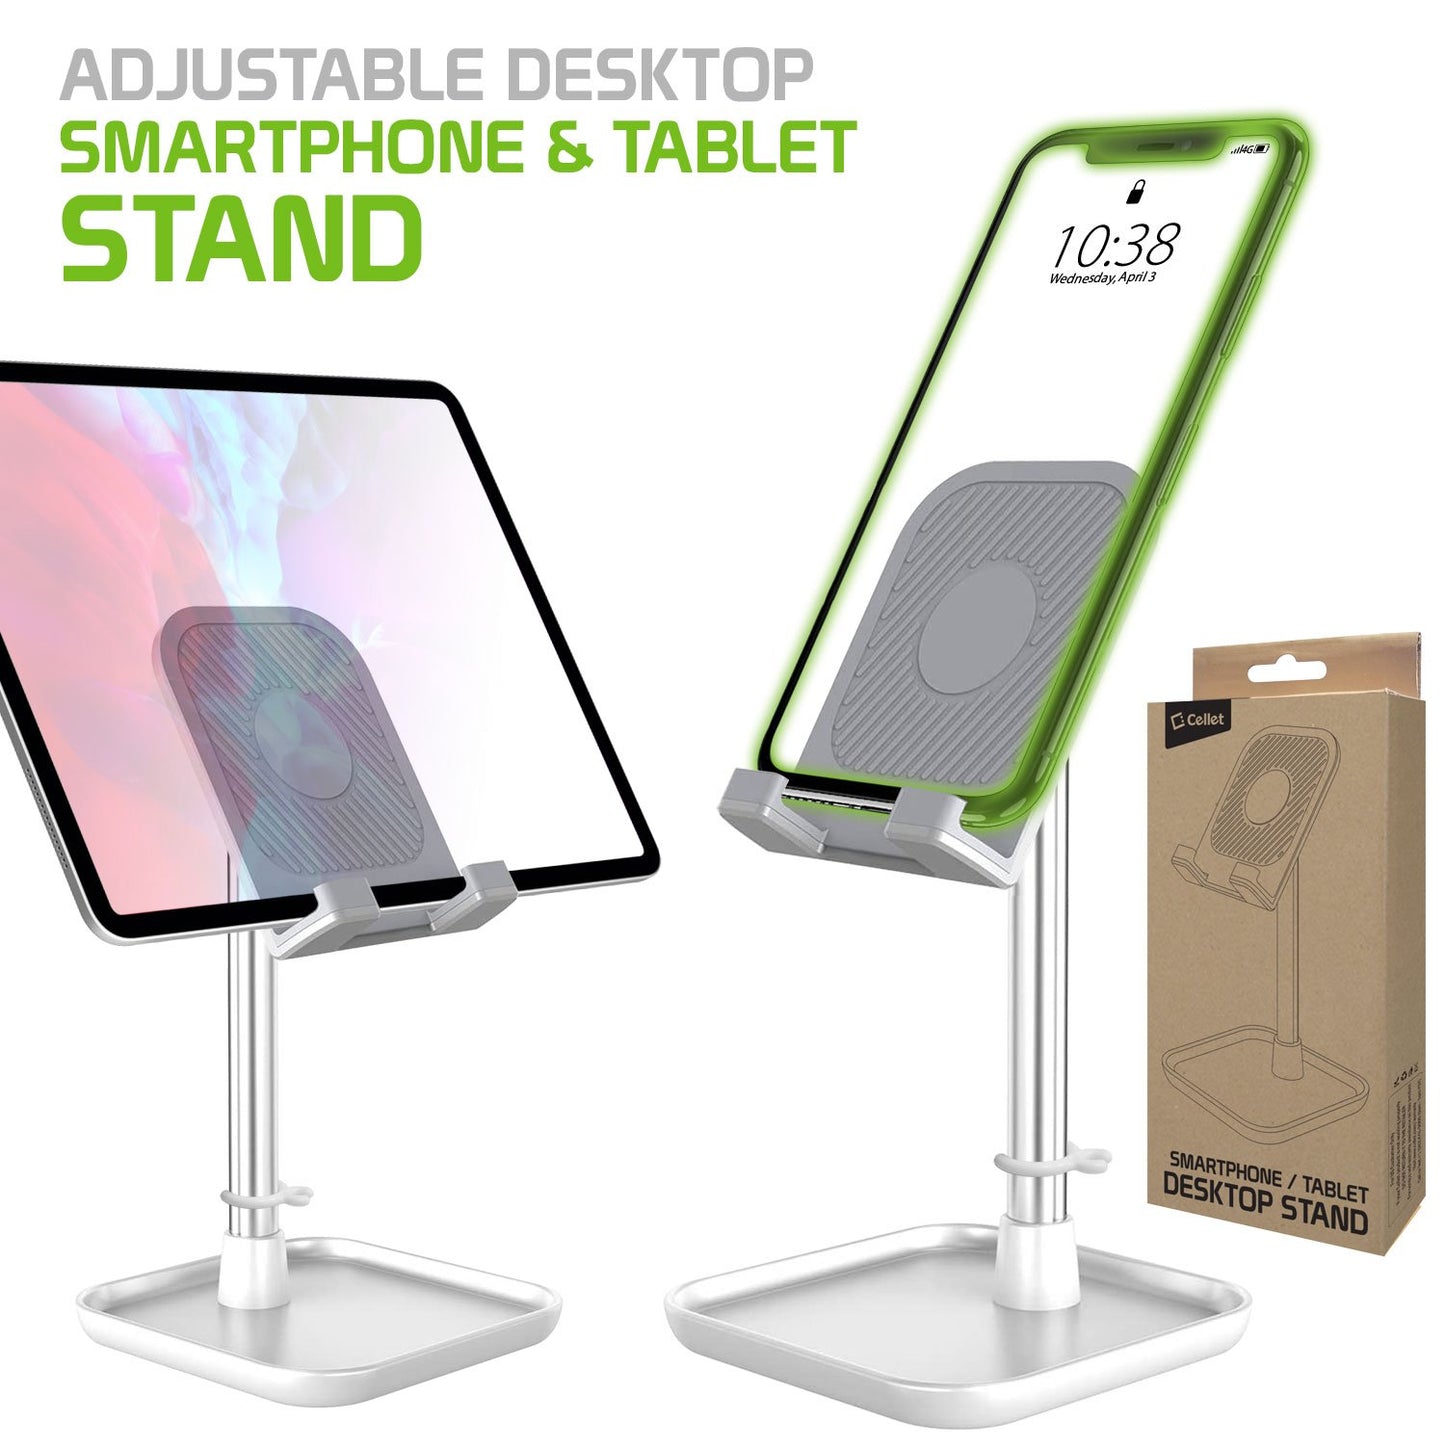 PH150SL -  Adjustable Desktop Smartphone and Tablet Stand with Mini Shelf, Non-Slip Rubberized Grips and Base Compatible to Smartphones, Tablets/iPads